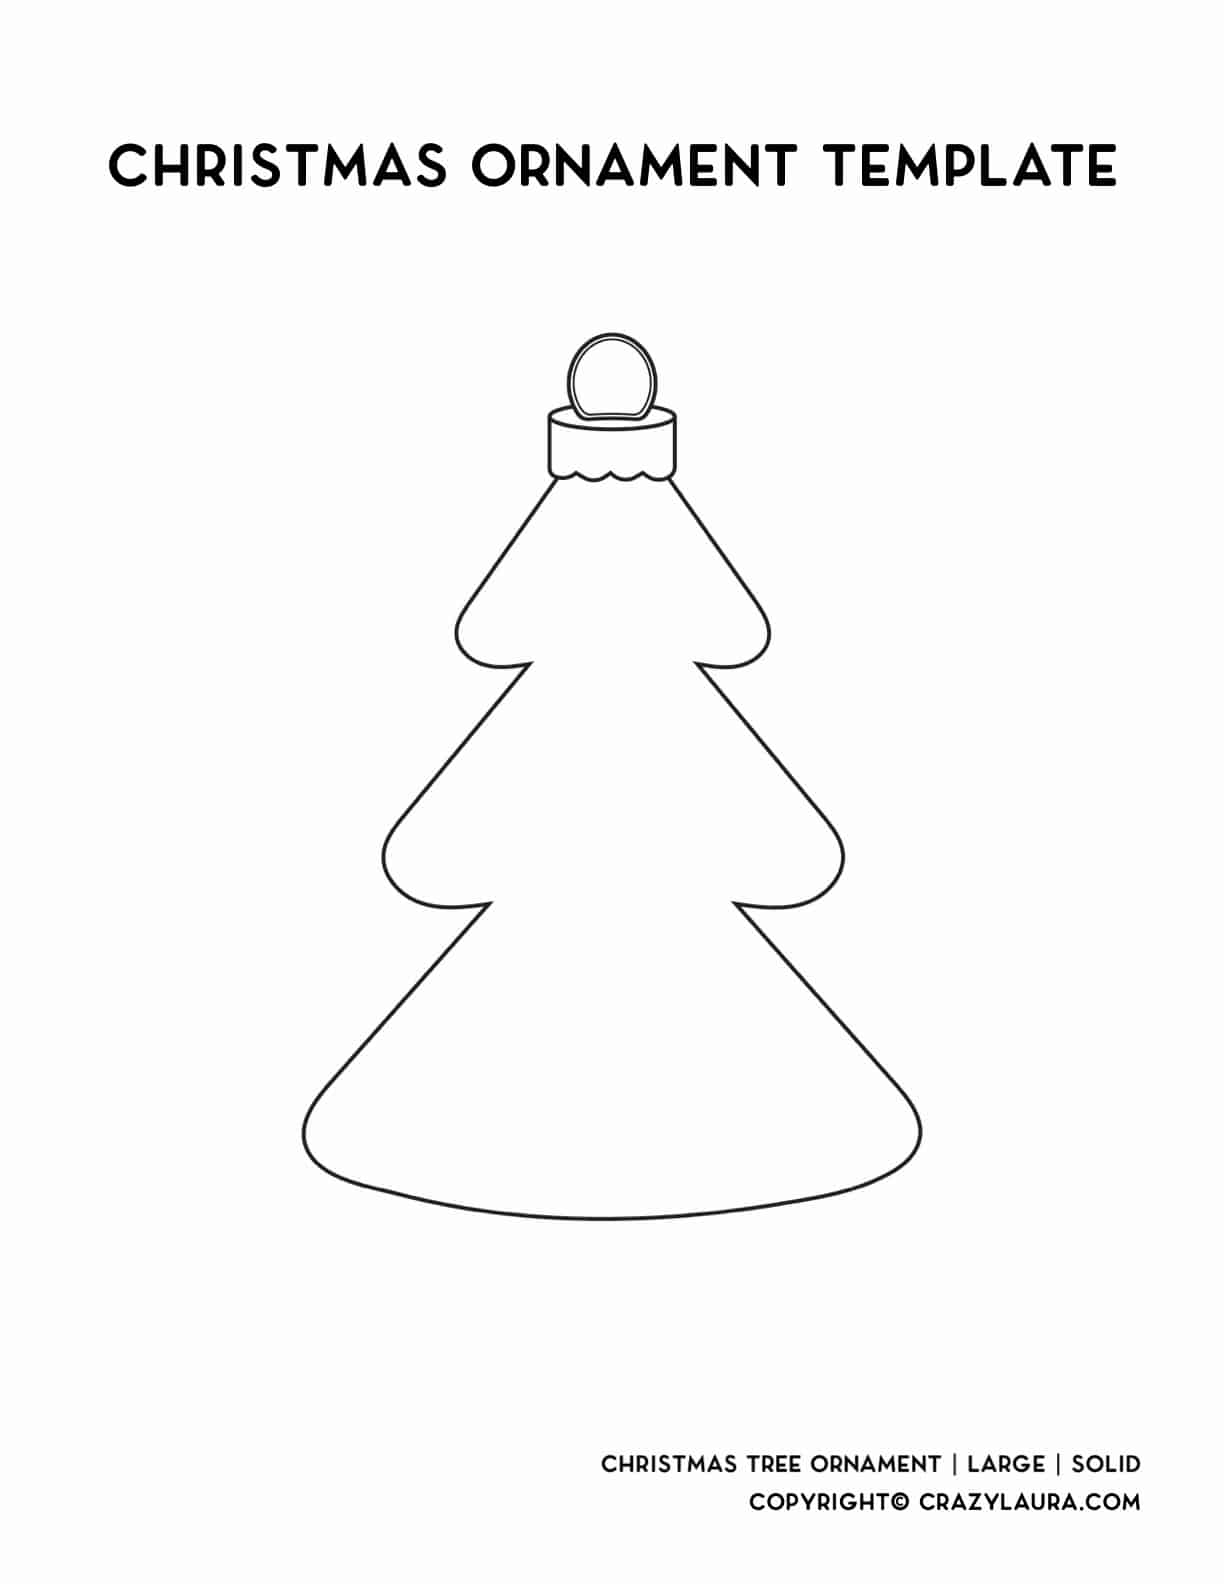 large tree ornament template for christmas